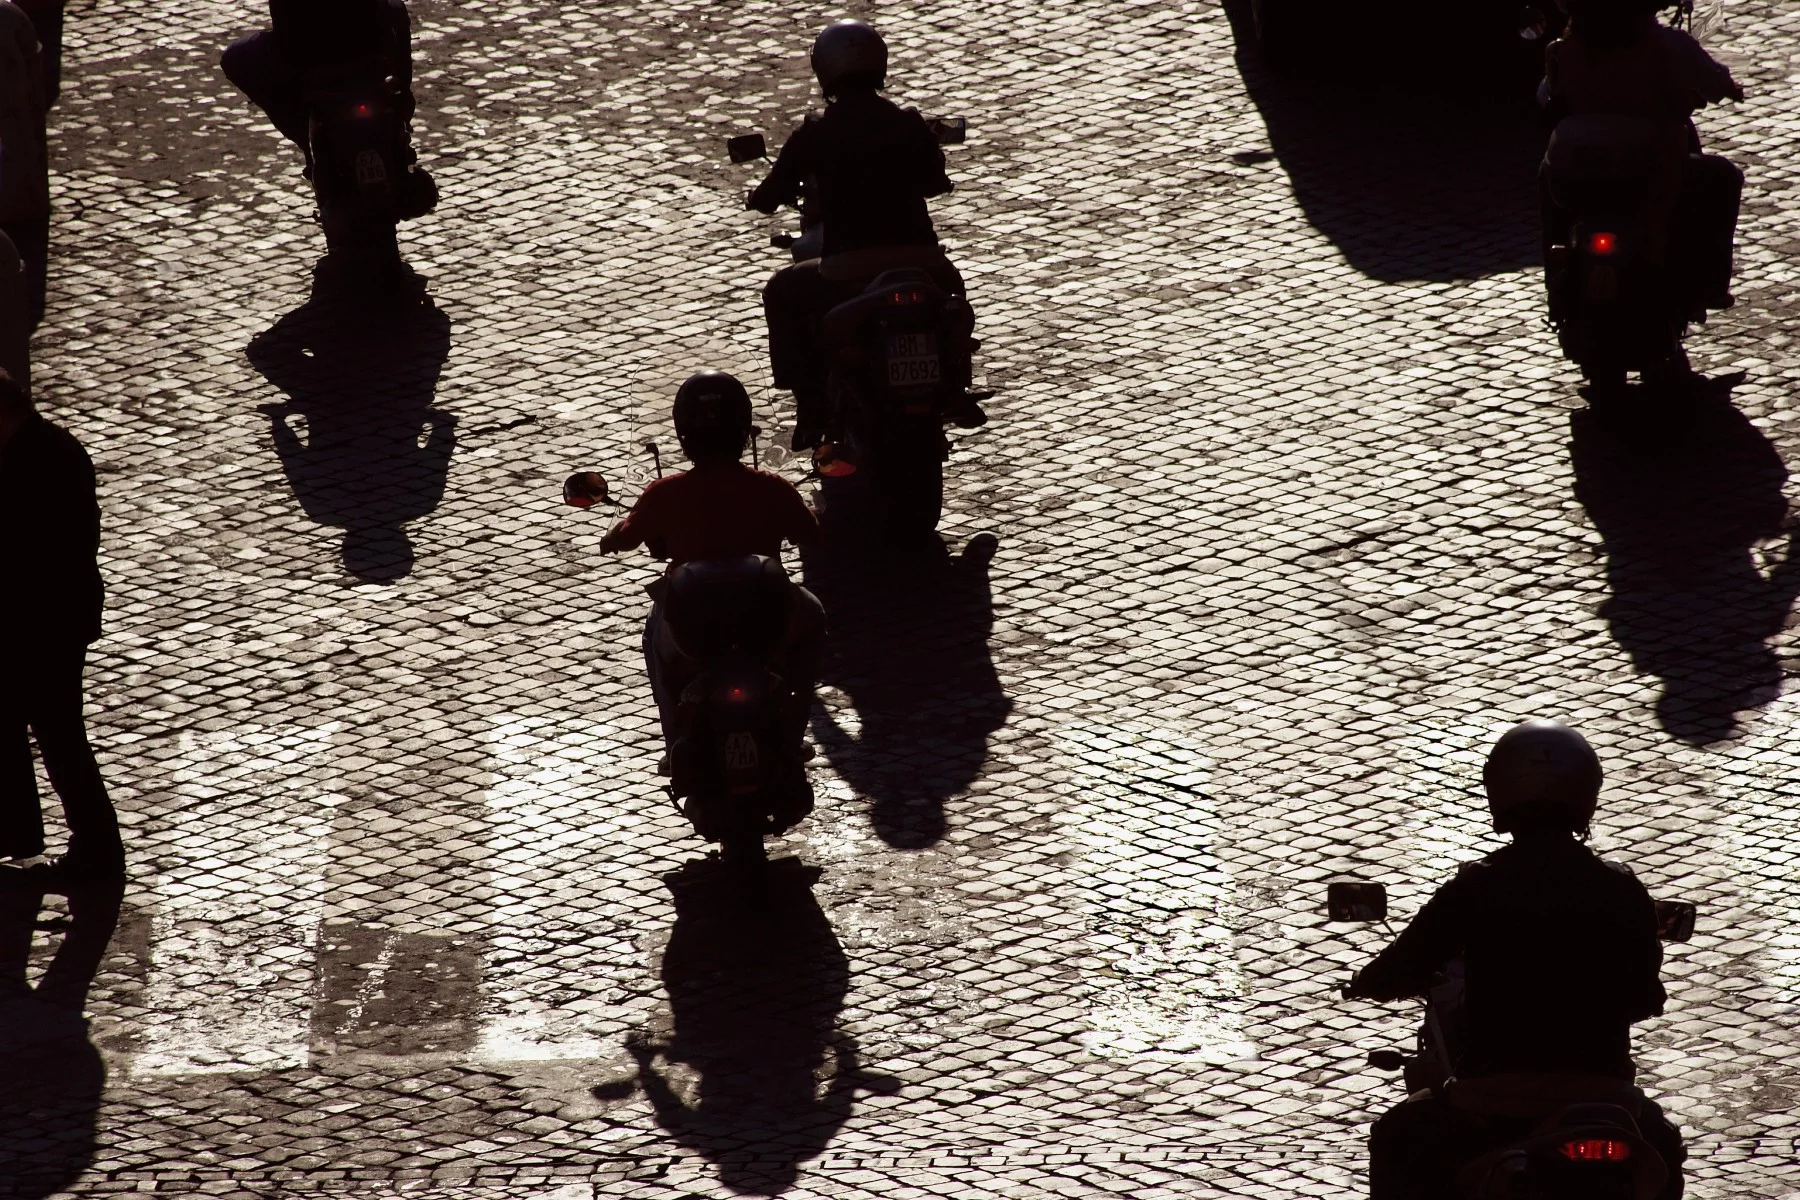 Sunlit silhouette view of commuters on scooters in Rome, Italy.